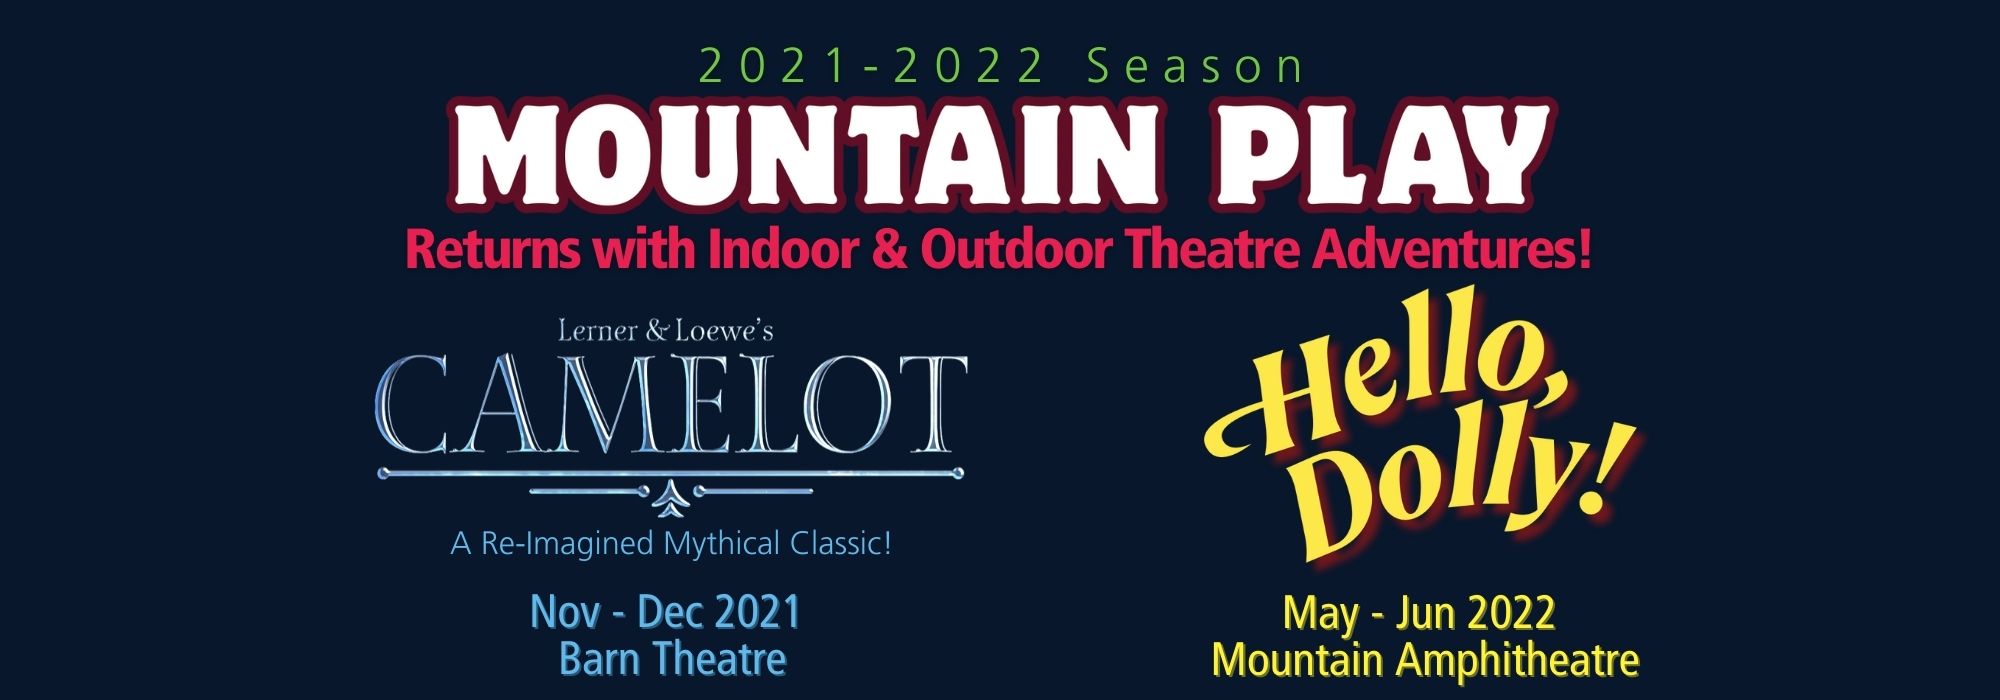 The Mountain Play Returns for our 2021-2022 Season with Indoor & Outdoor Theatre Adventures! Lerner & Loewe's Camelot- November and December 2021 Barn Theater, Hello, Dolly! May June 2022 Cushing Ampitheatre